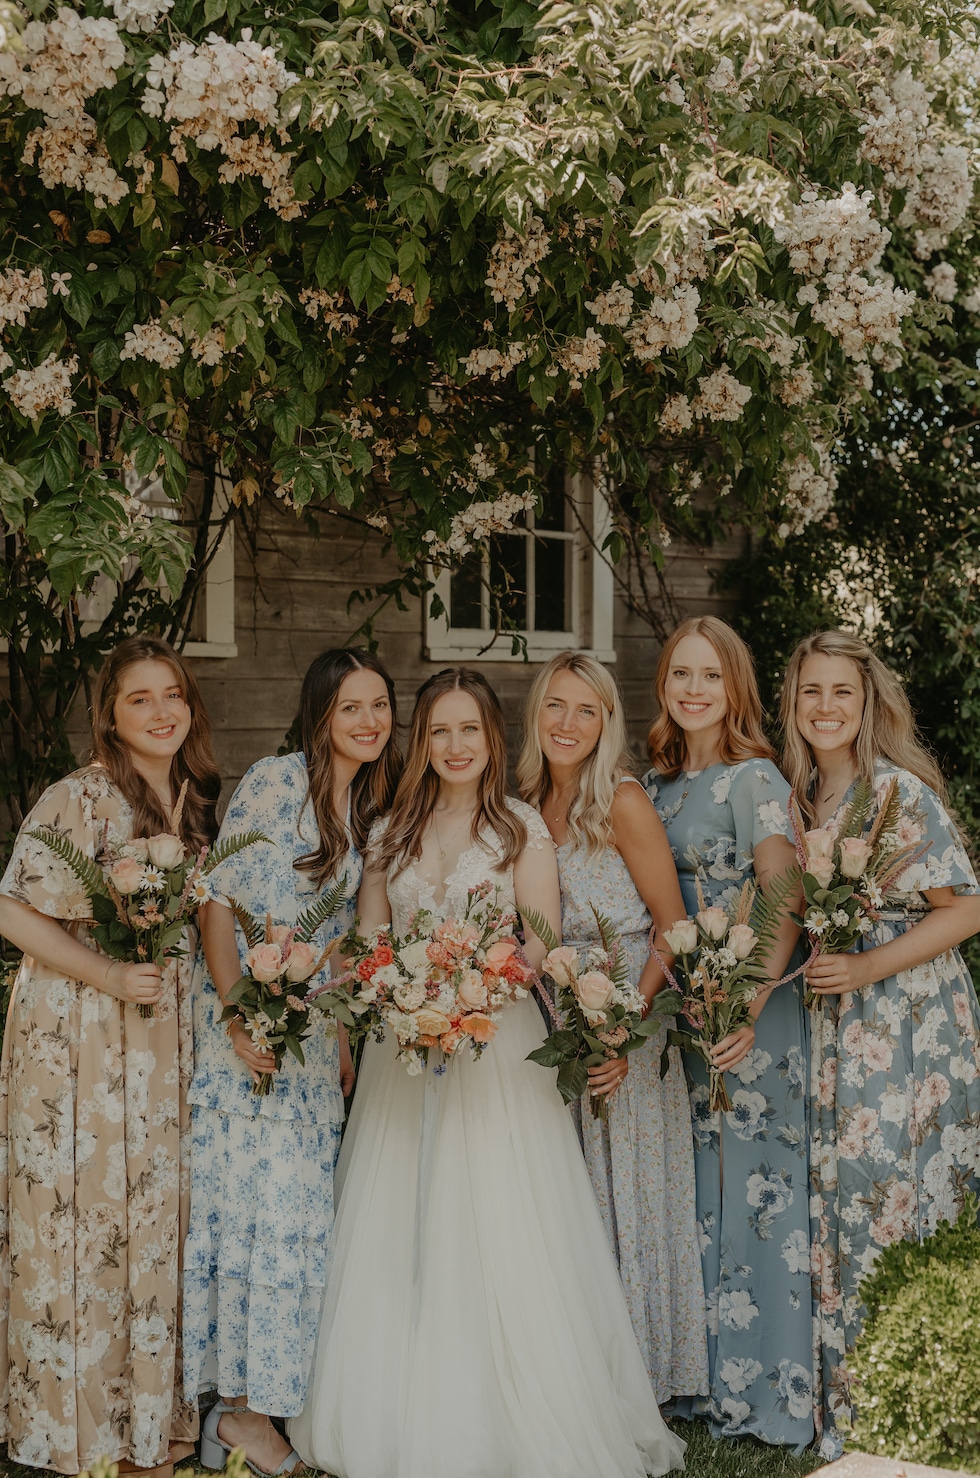 Courtney's Wedding Planning Advice for a Beautiful Wedding on a Reasonable Budget!